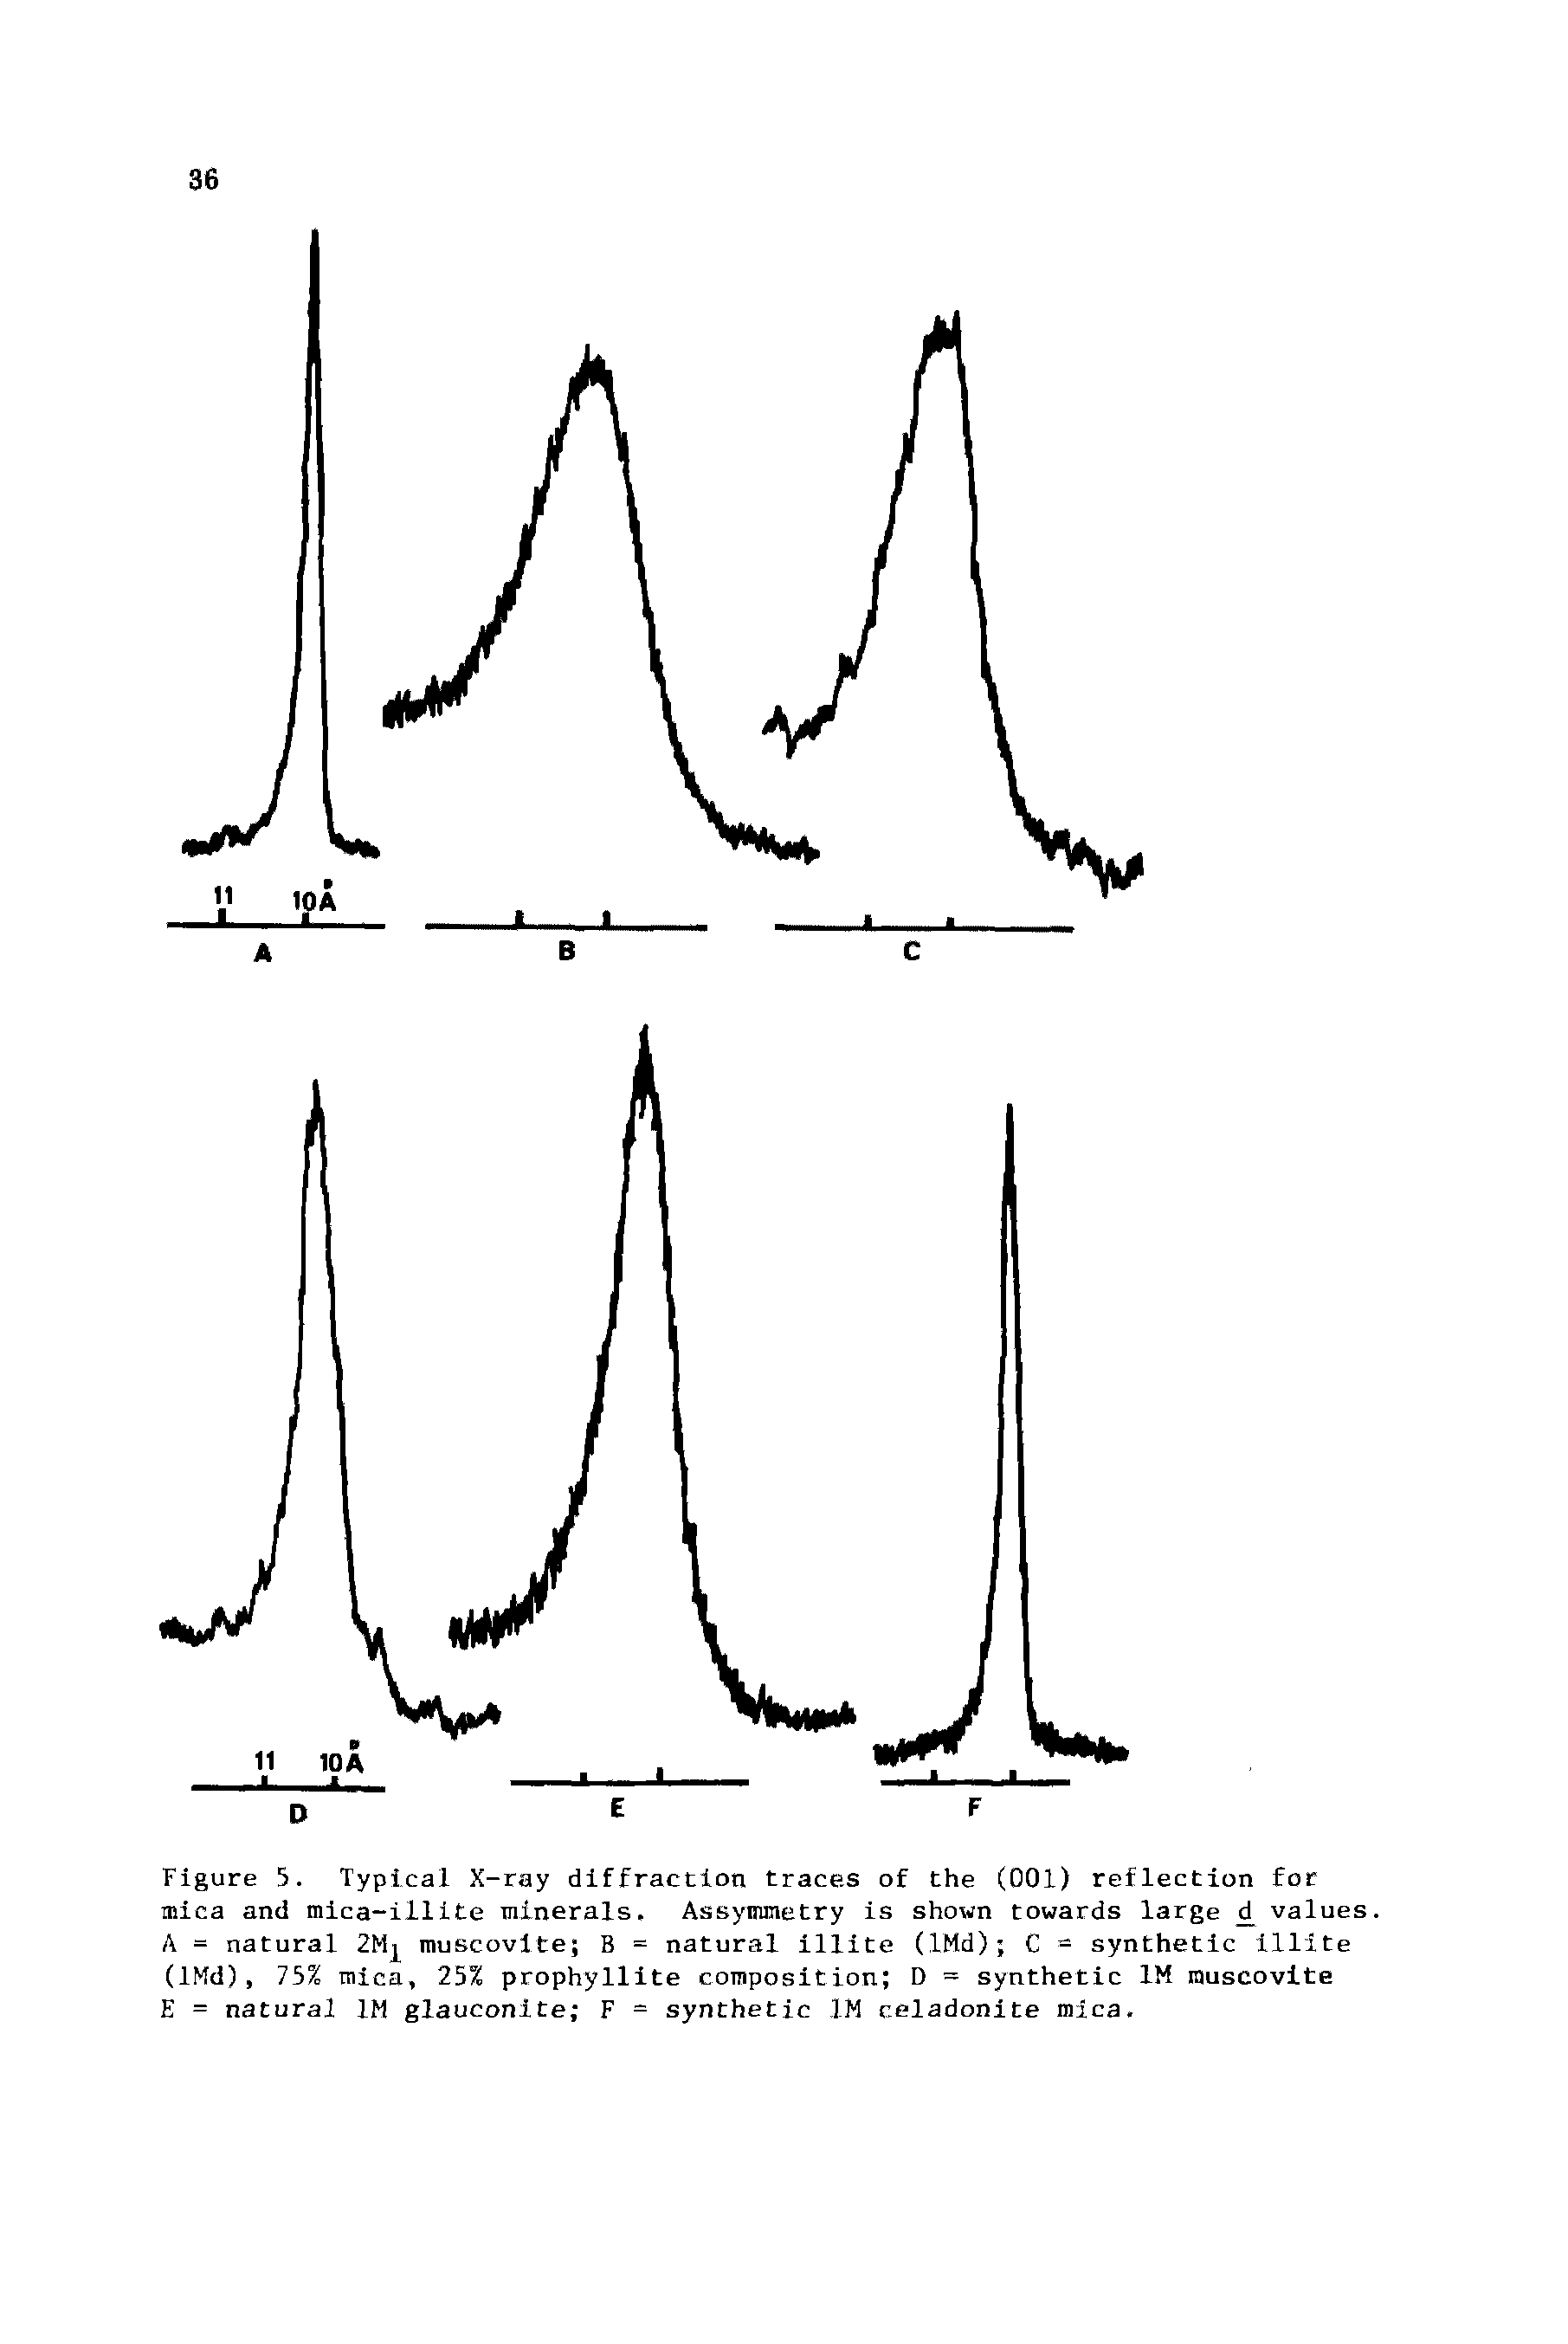 Figure 5. Typical X-ray diffraction traces of the (001) reflection for mica and mica-illite minerals. Assymmetry is shown towards large values. A - natural 2M muscovite B = natural illite (IMd) C - synthetic illite (lMd), 75% mica, 25% prophyllite composition D = synthetic 1M muscovite E - natural 1M glauconite F = synthetic 1M celadonite mica.